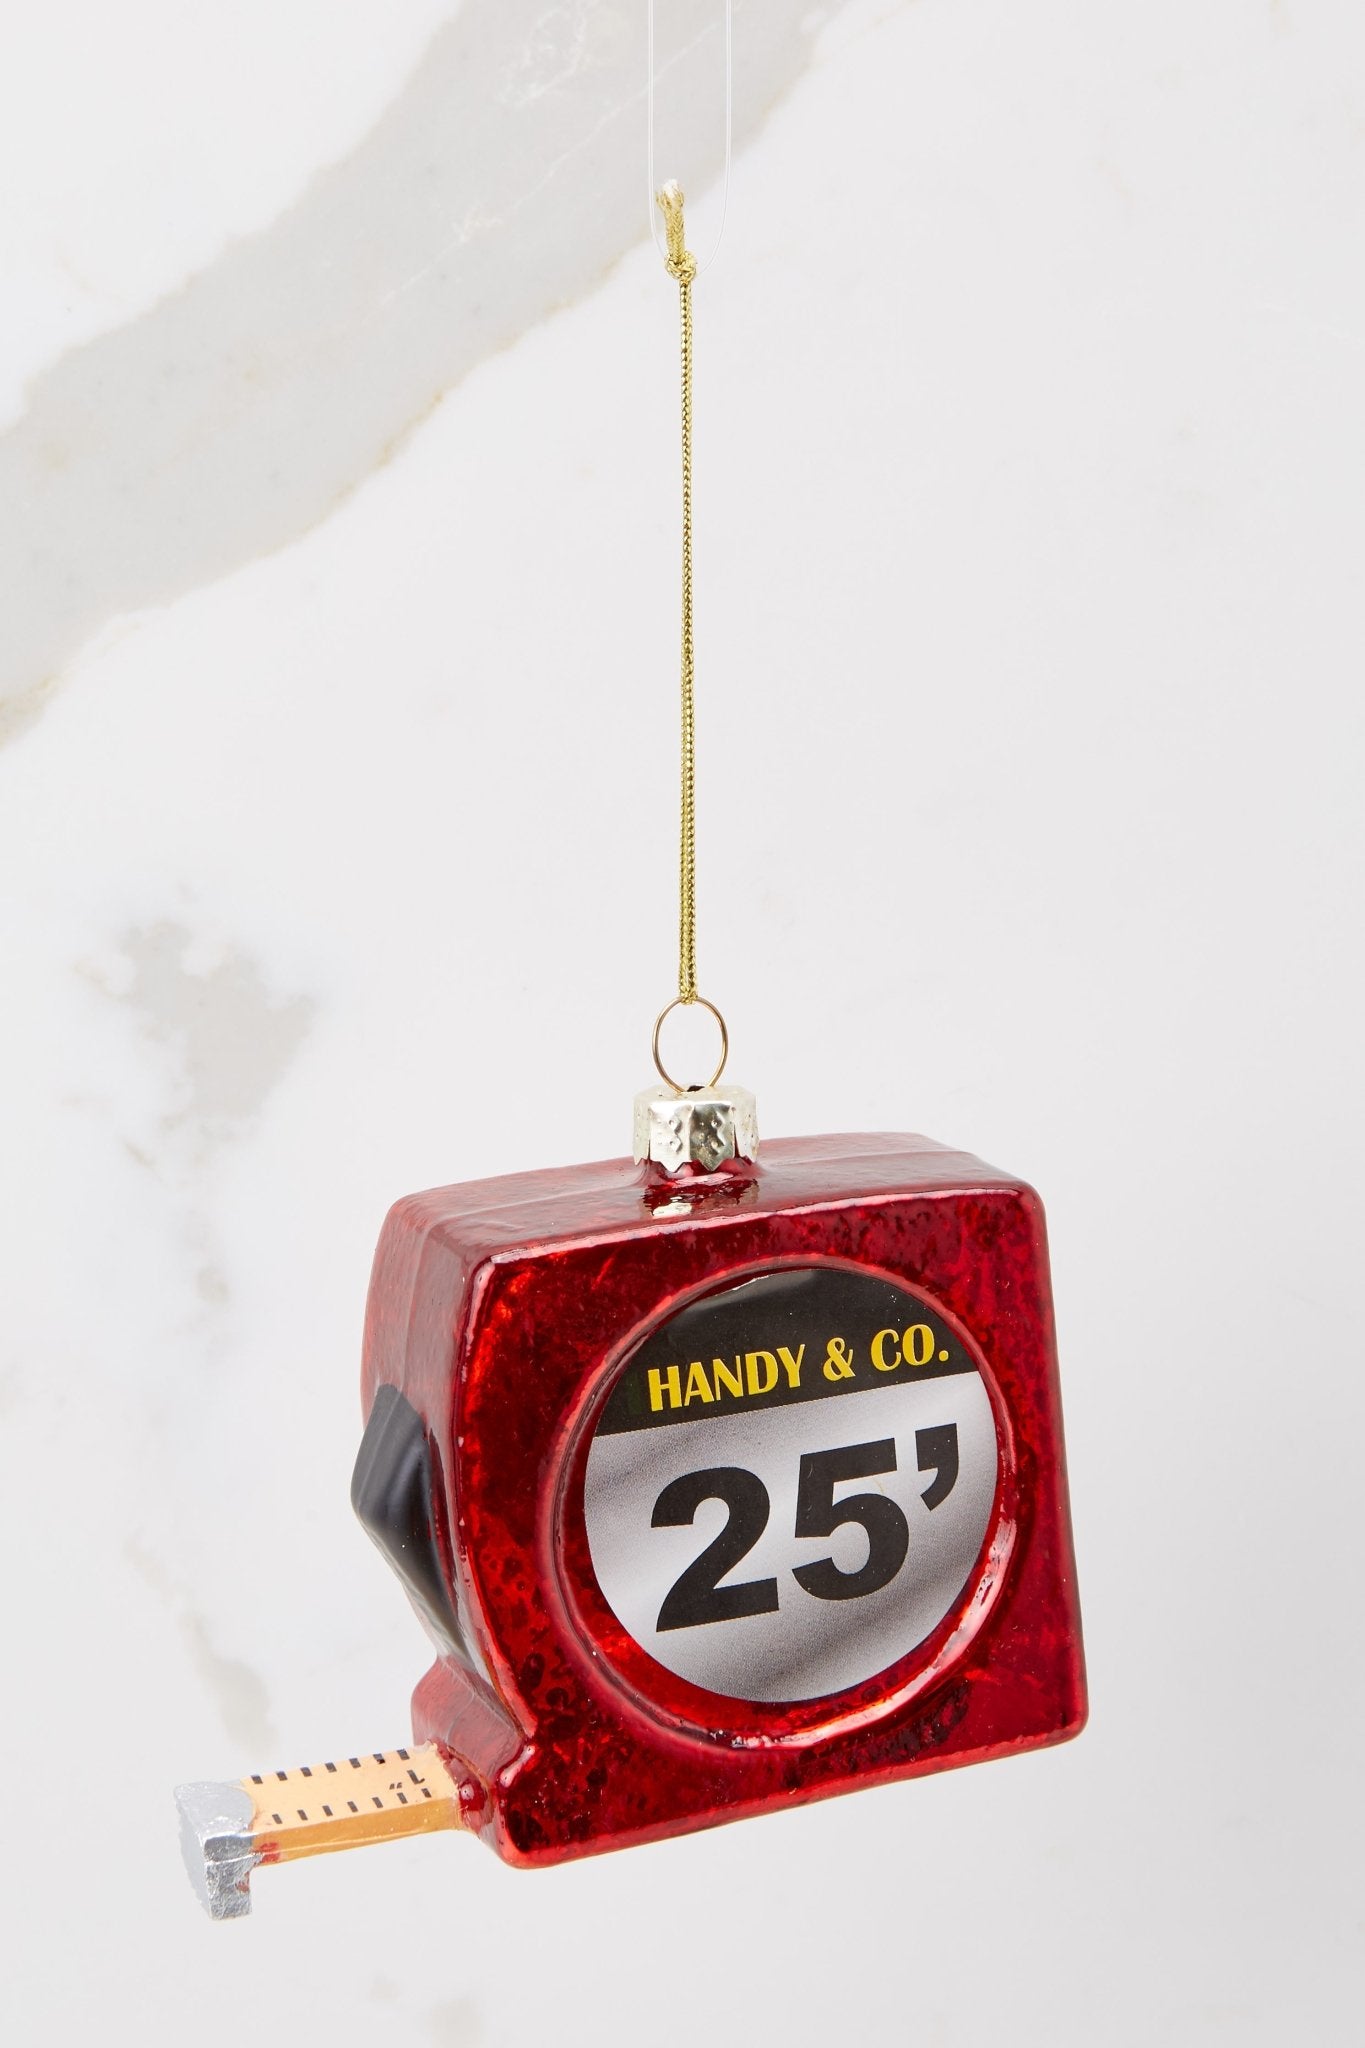 Front view of this ornament that features a red measuring tape with a gold string to hang on the tree